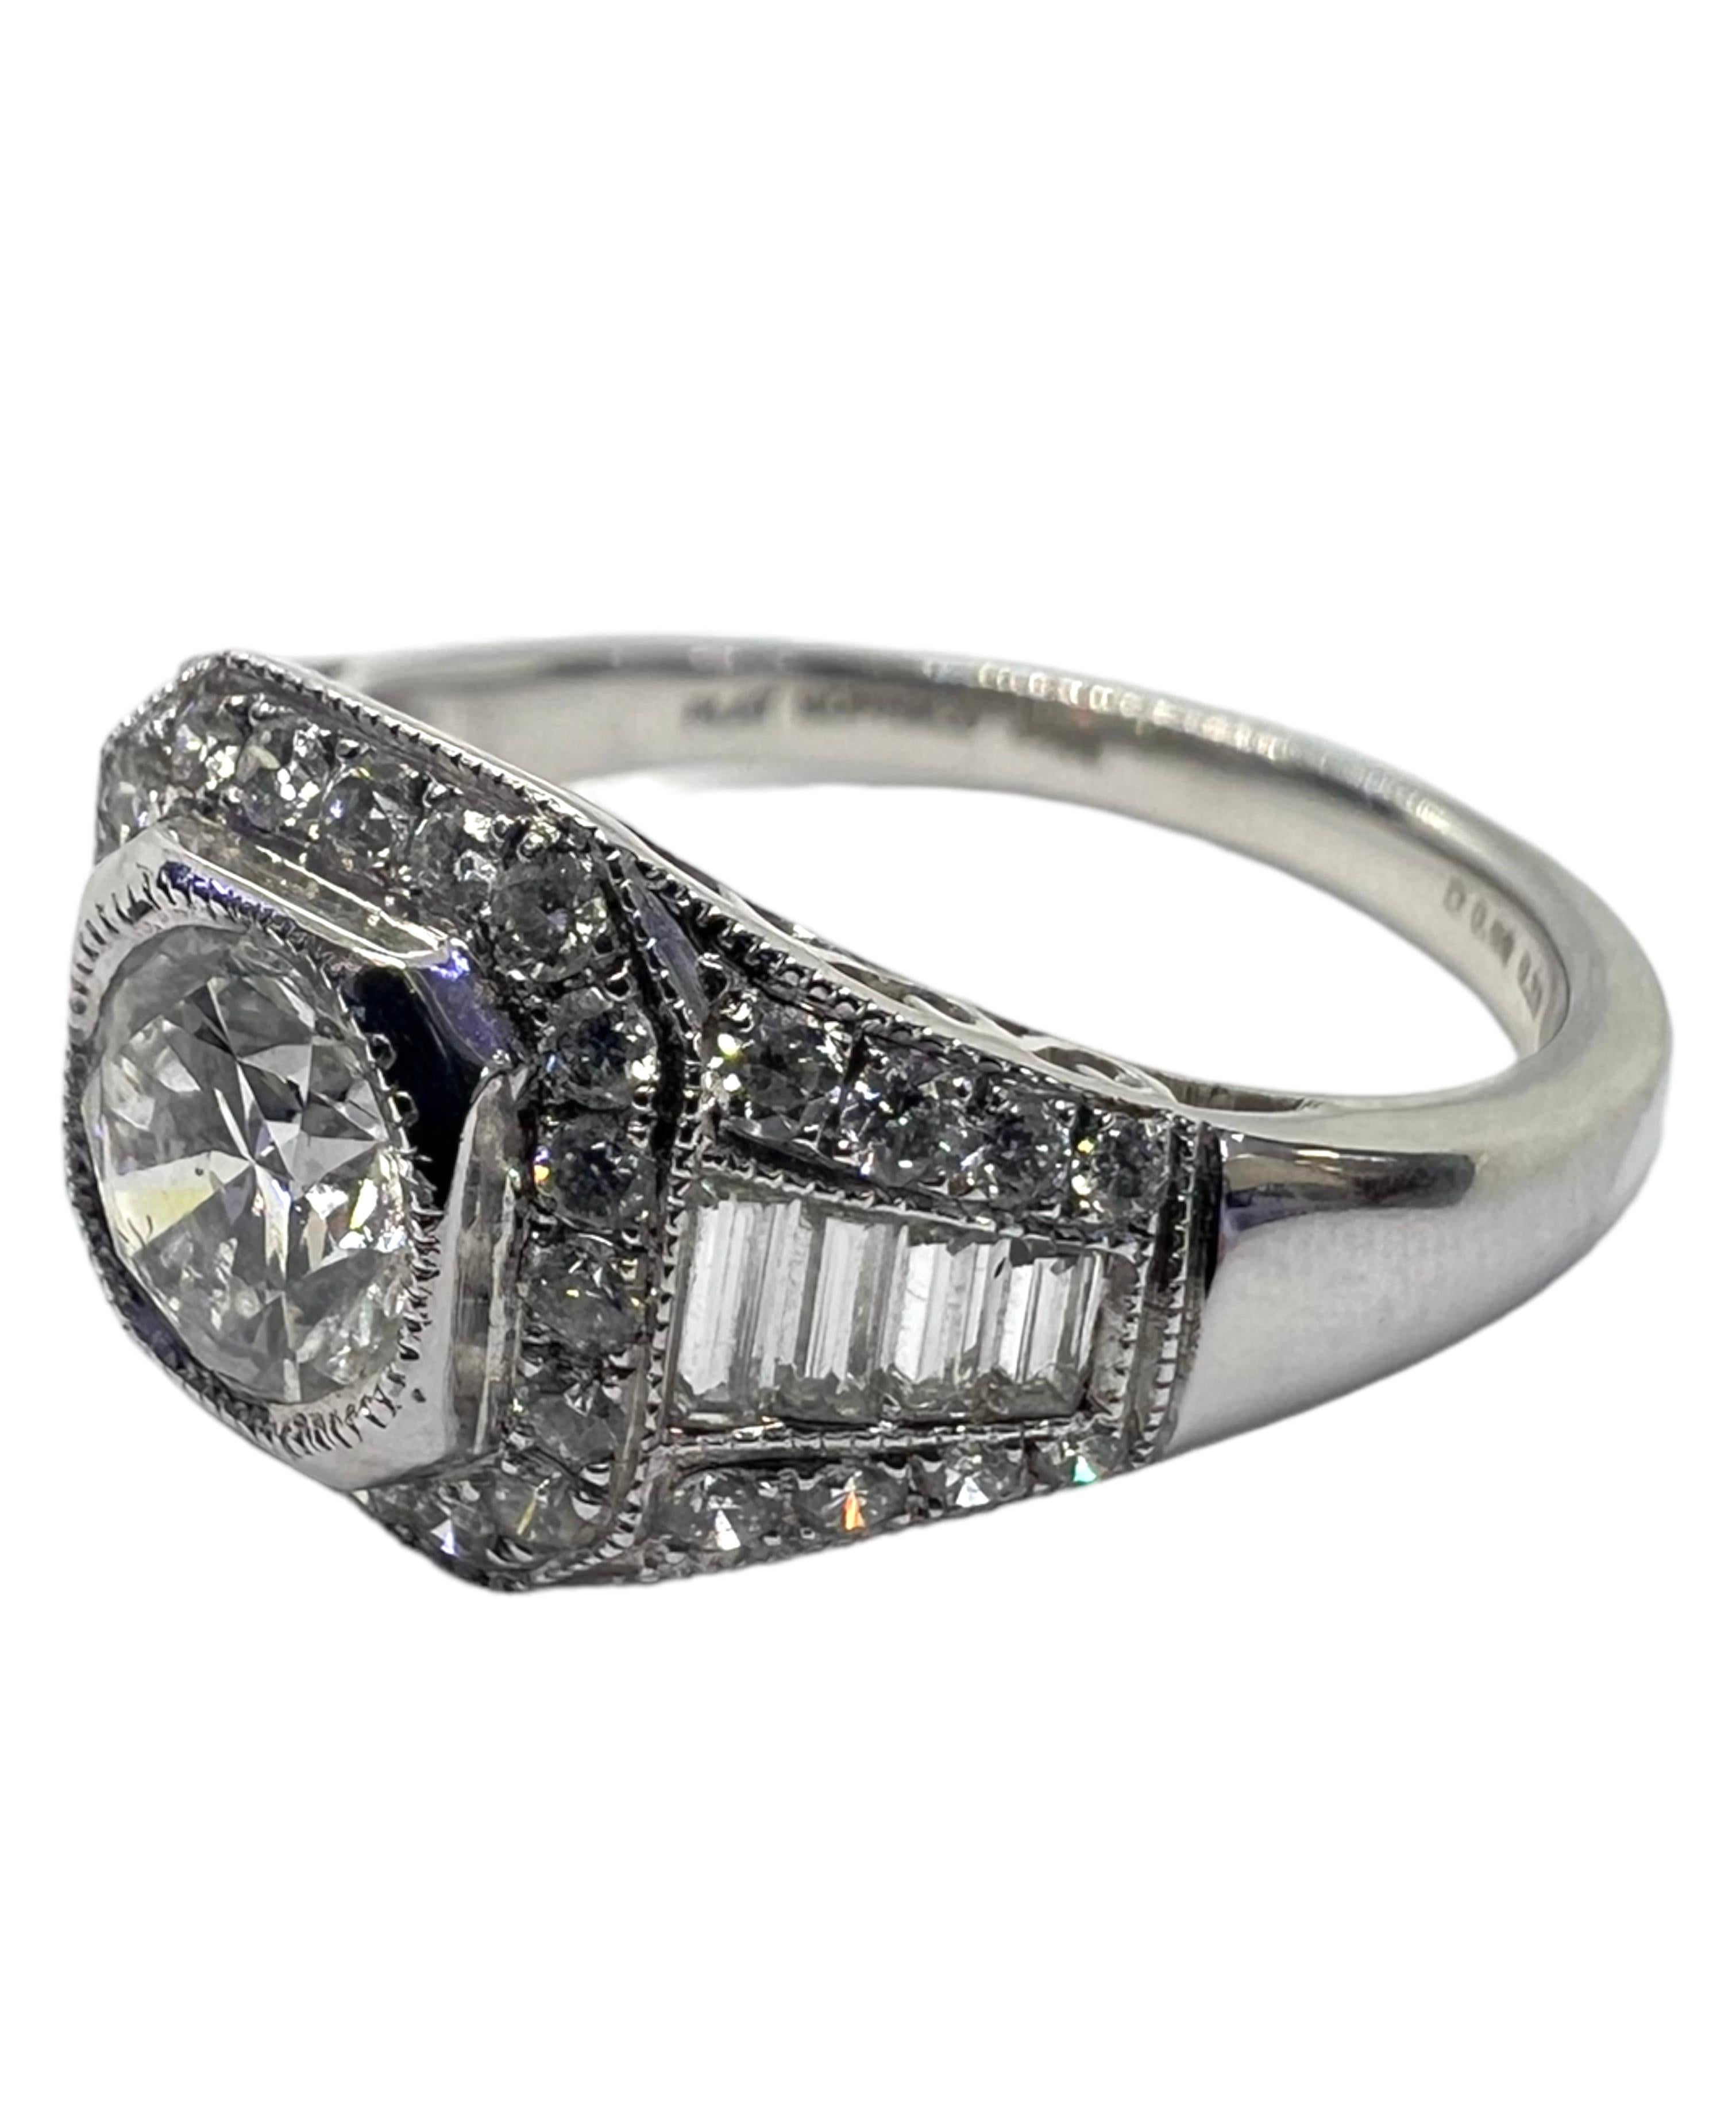 Art deco ring set in platinum with .68 carat round cut diamond center and .54 carat small diamonds.

Sophia D by Joseph Dardashti LTD has been known worldwide for 35 years and are inspired by classic Art Deco design that merges with modern